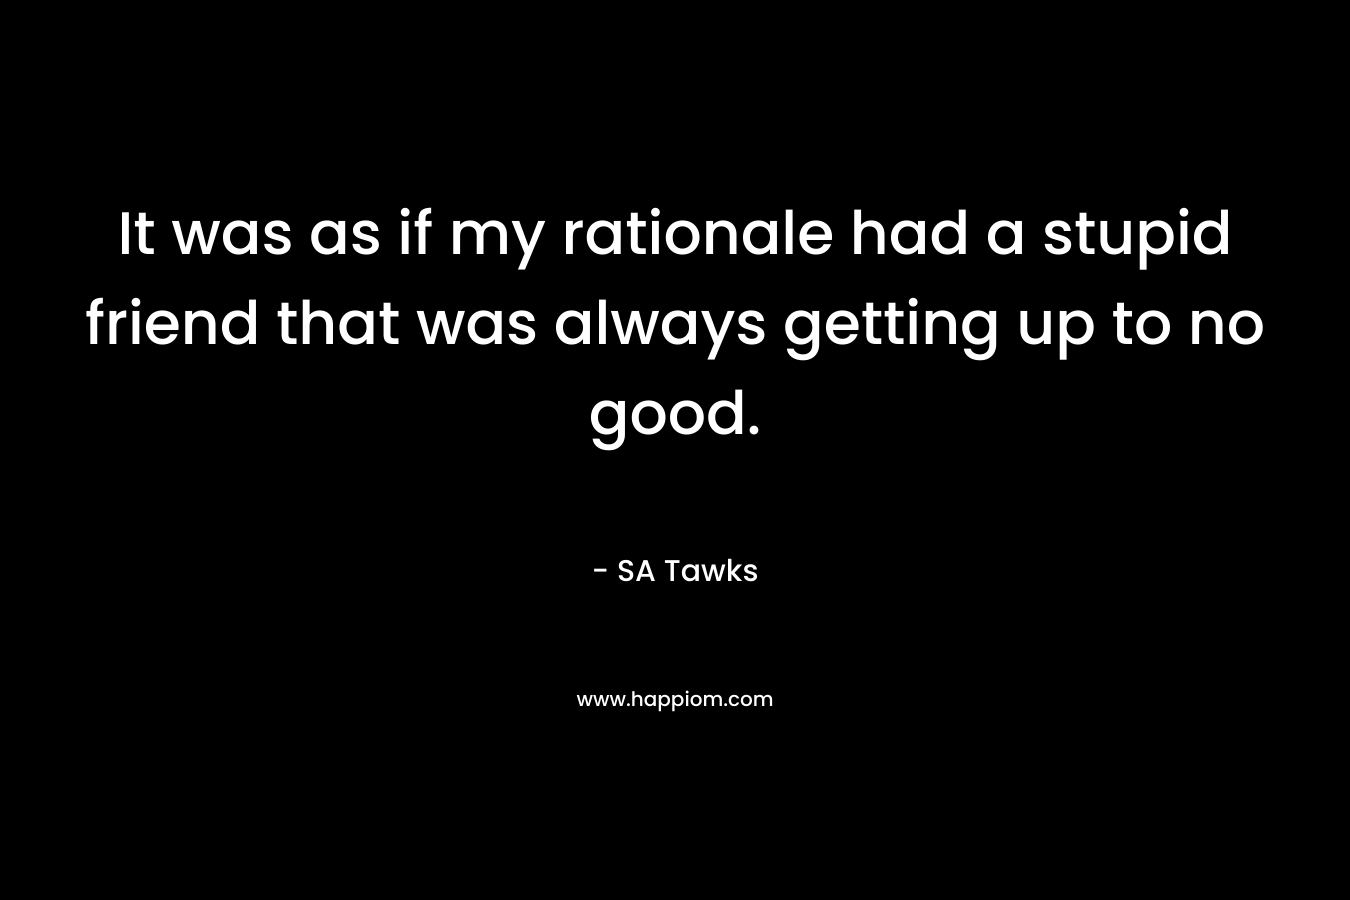 It was as if my rationale had a stupid friend that was always getting up to no good. – SA Tawks